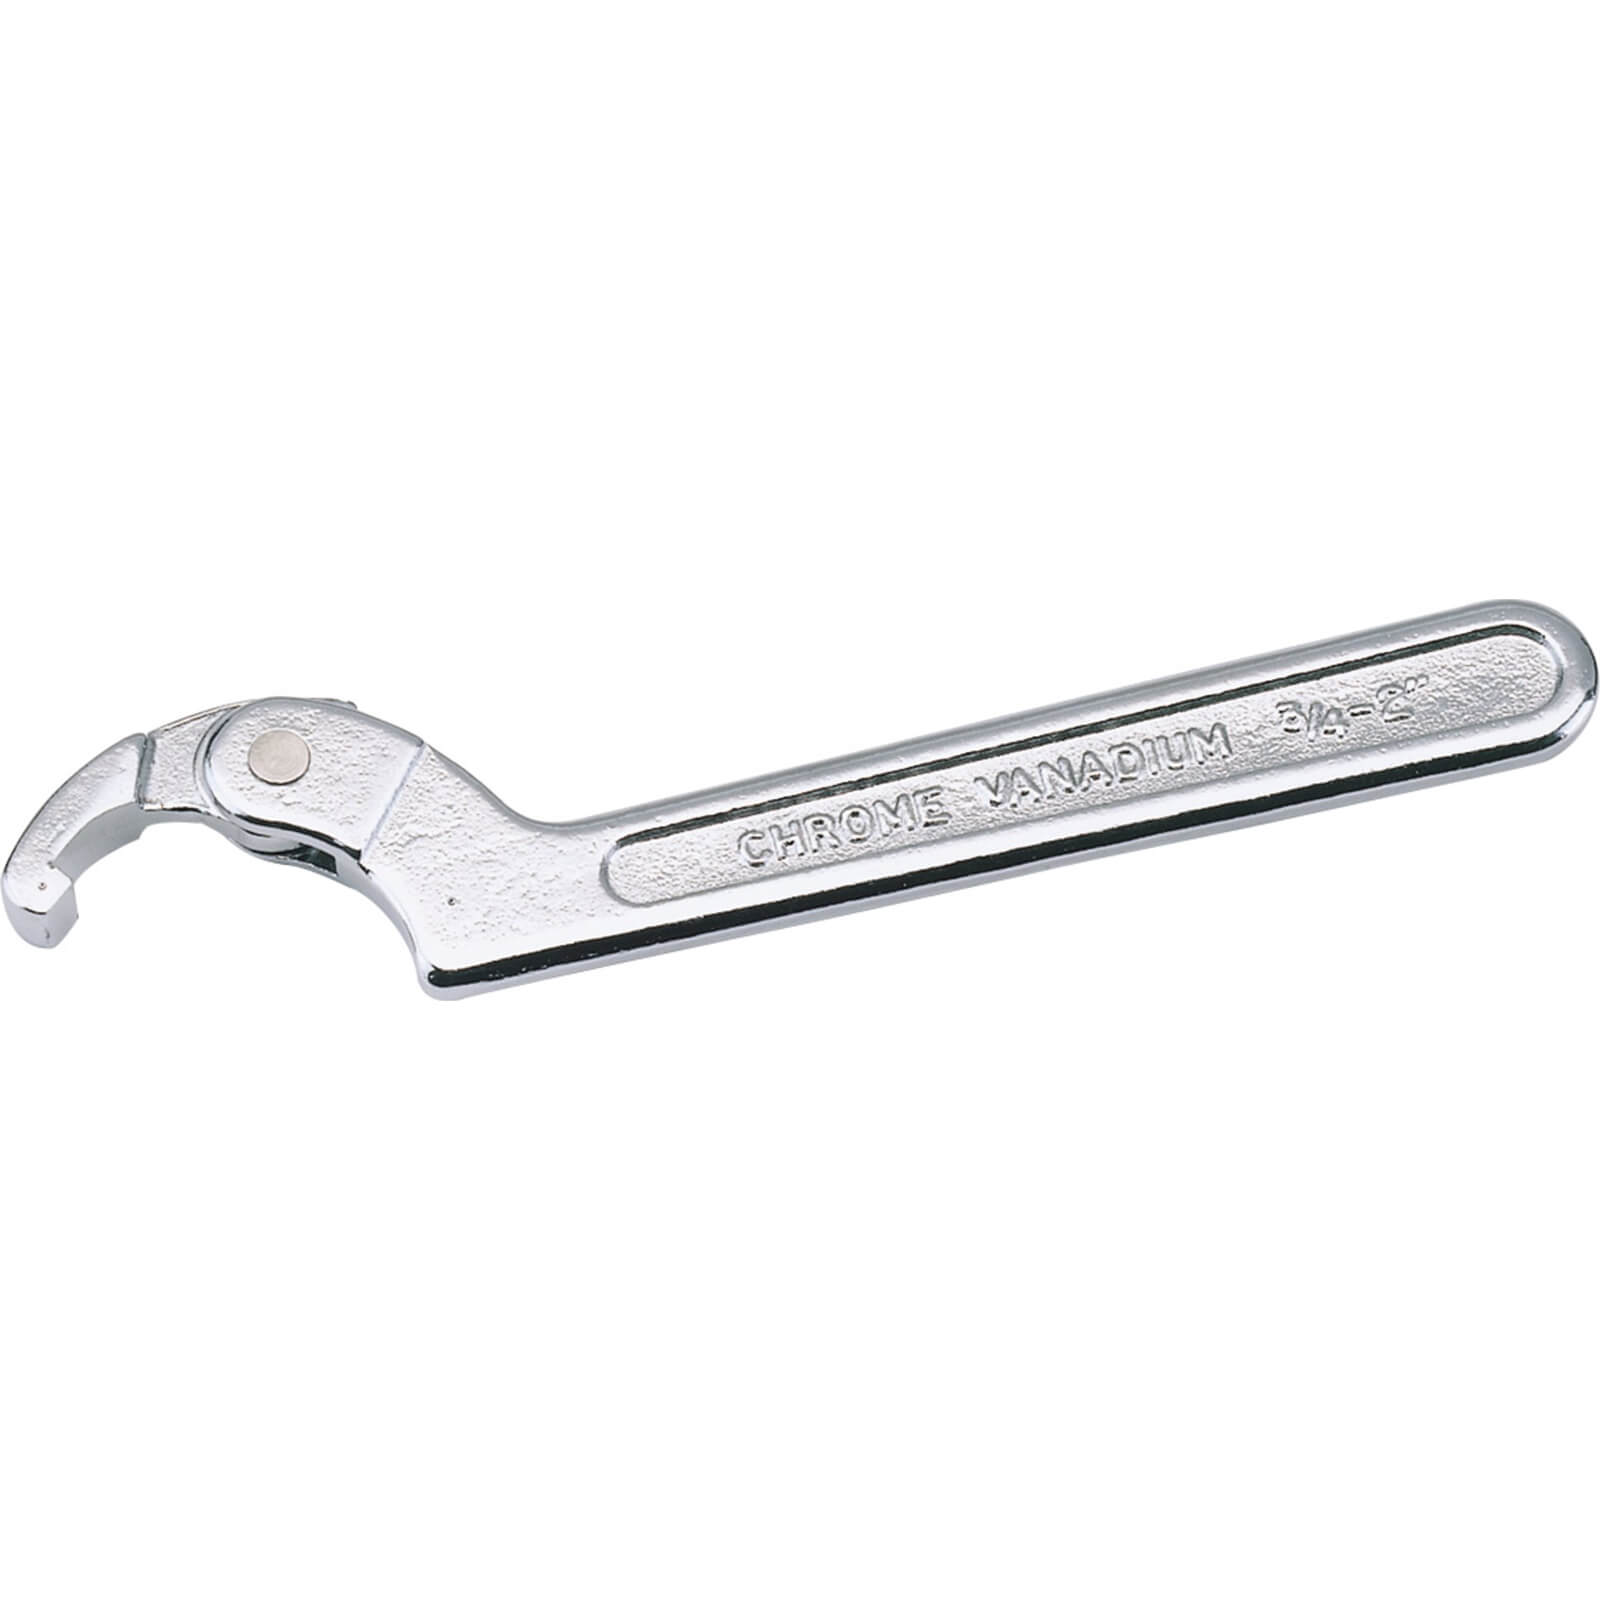 Photos - Wrench Draper Hook and Pin Spanner 19mm x 51mm HWC 